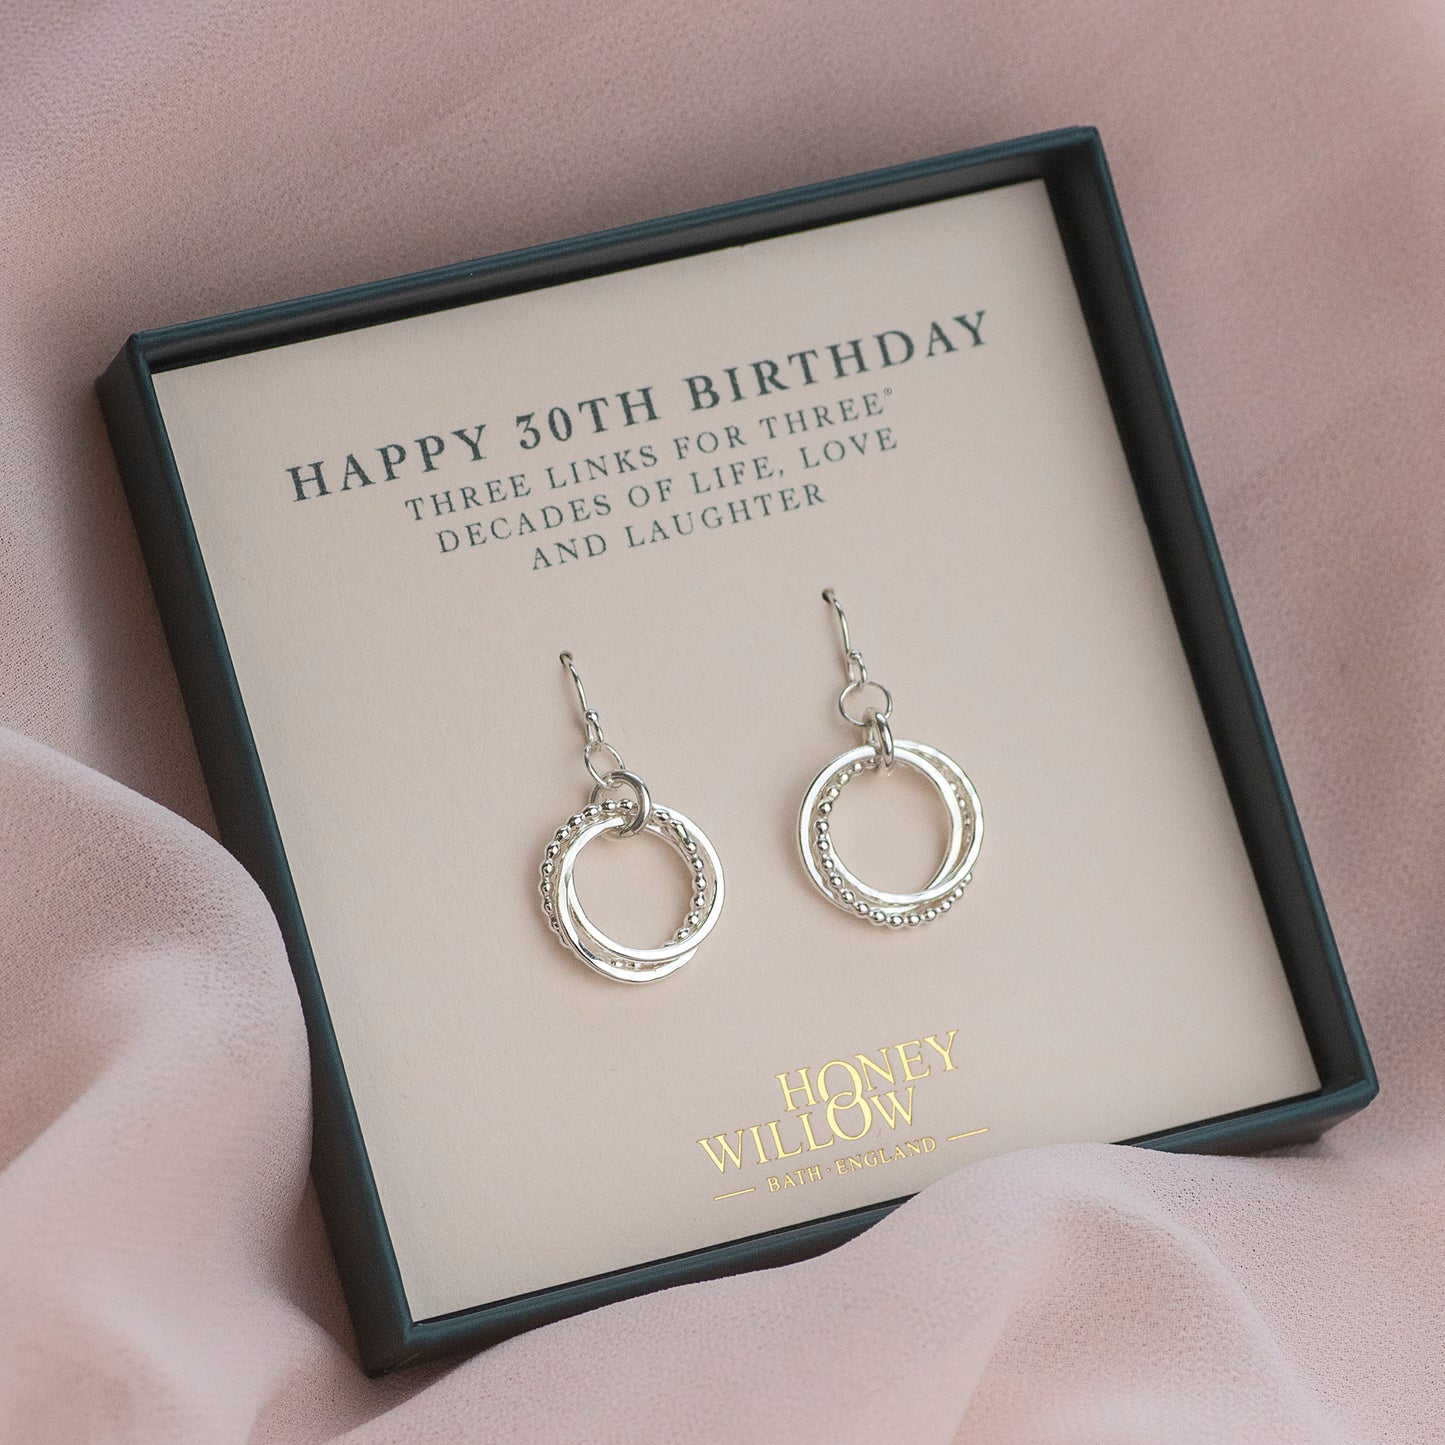 30th Birthday Earrings - 3 Links for 3 Decades - Silver